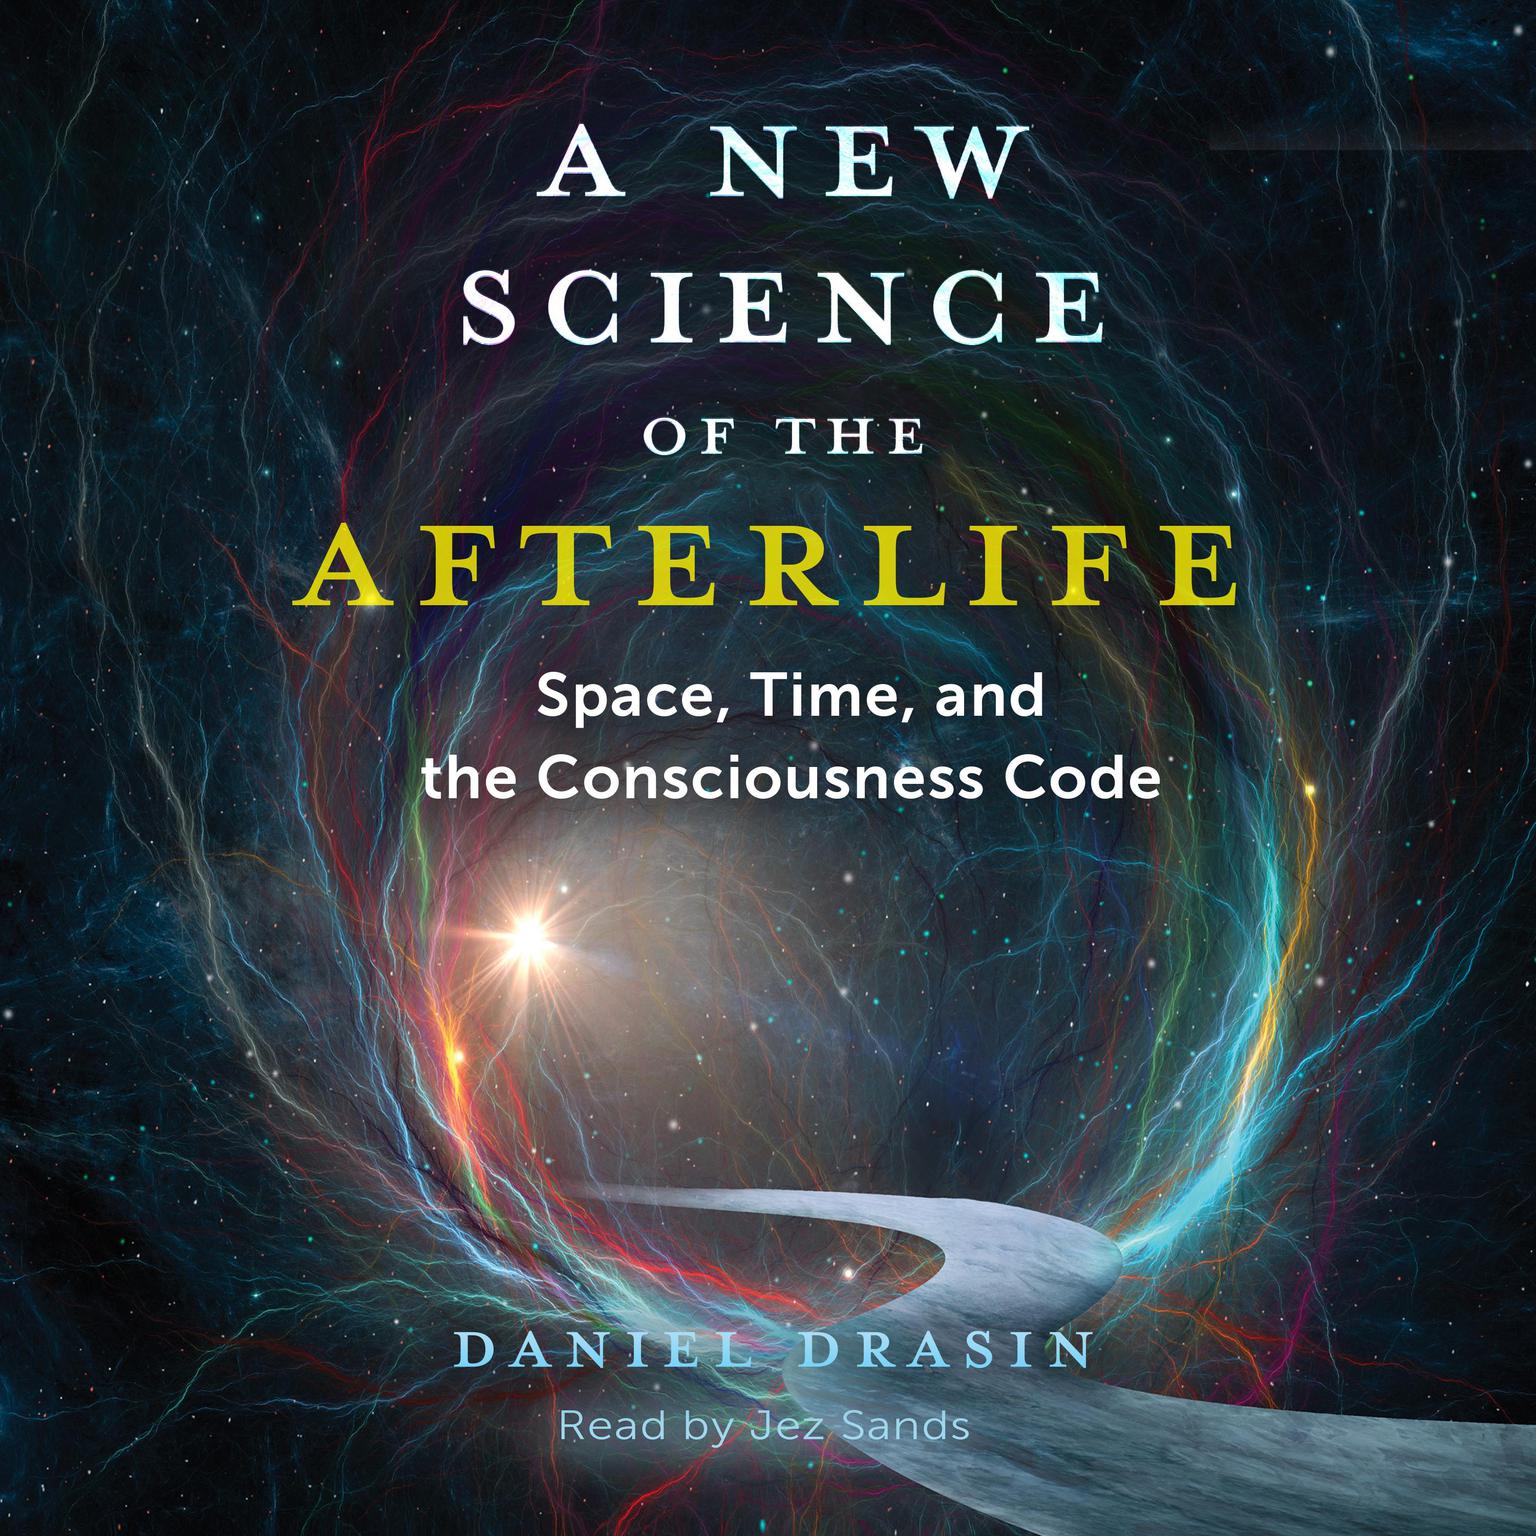 A New Science of the Afterlife: Space, Time, and the Consciousness Code Audiobook, by Daniel Drasin